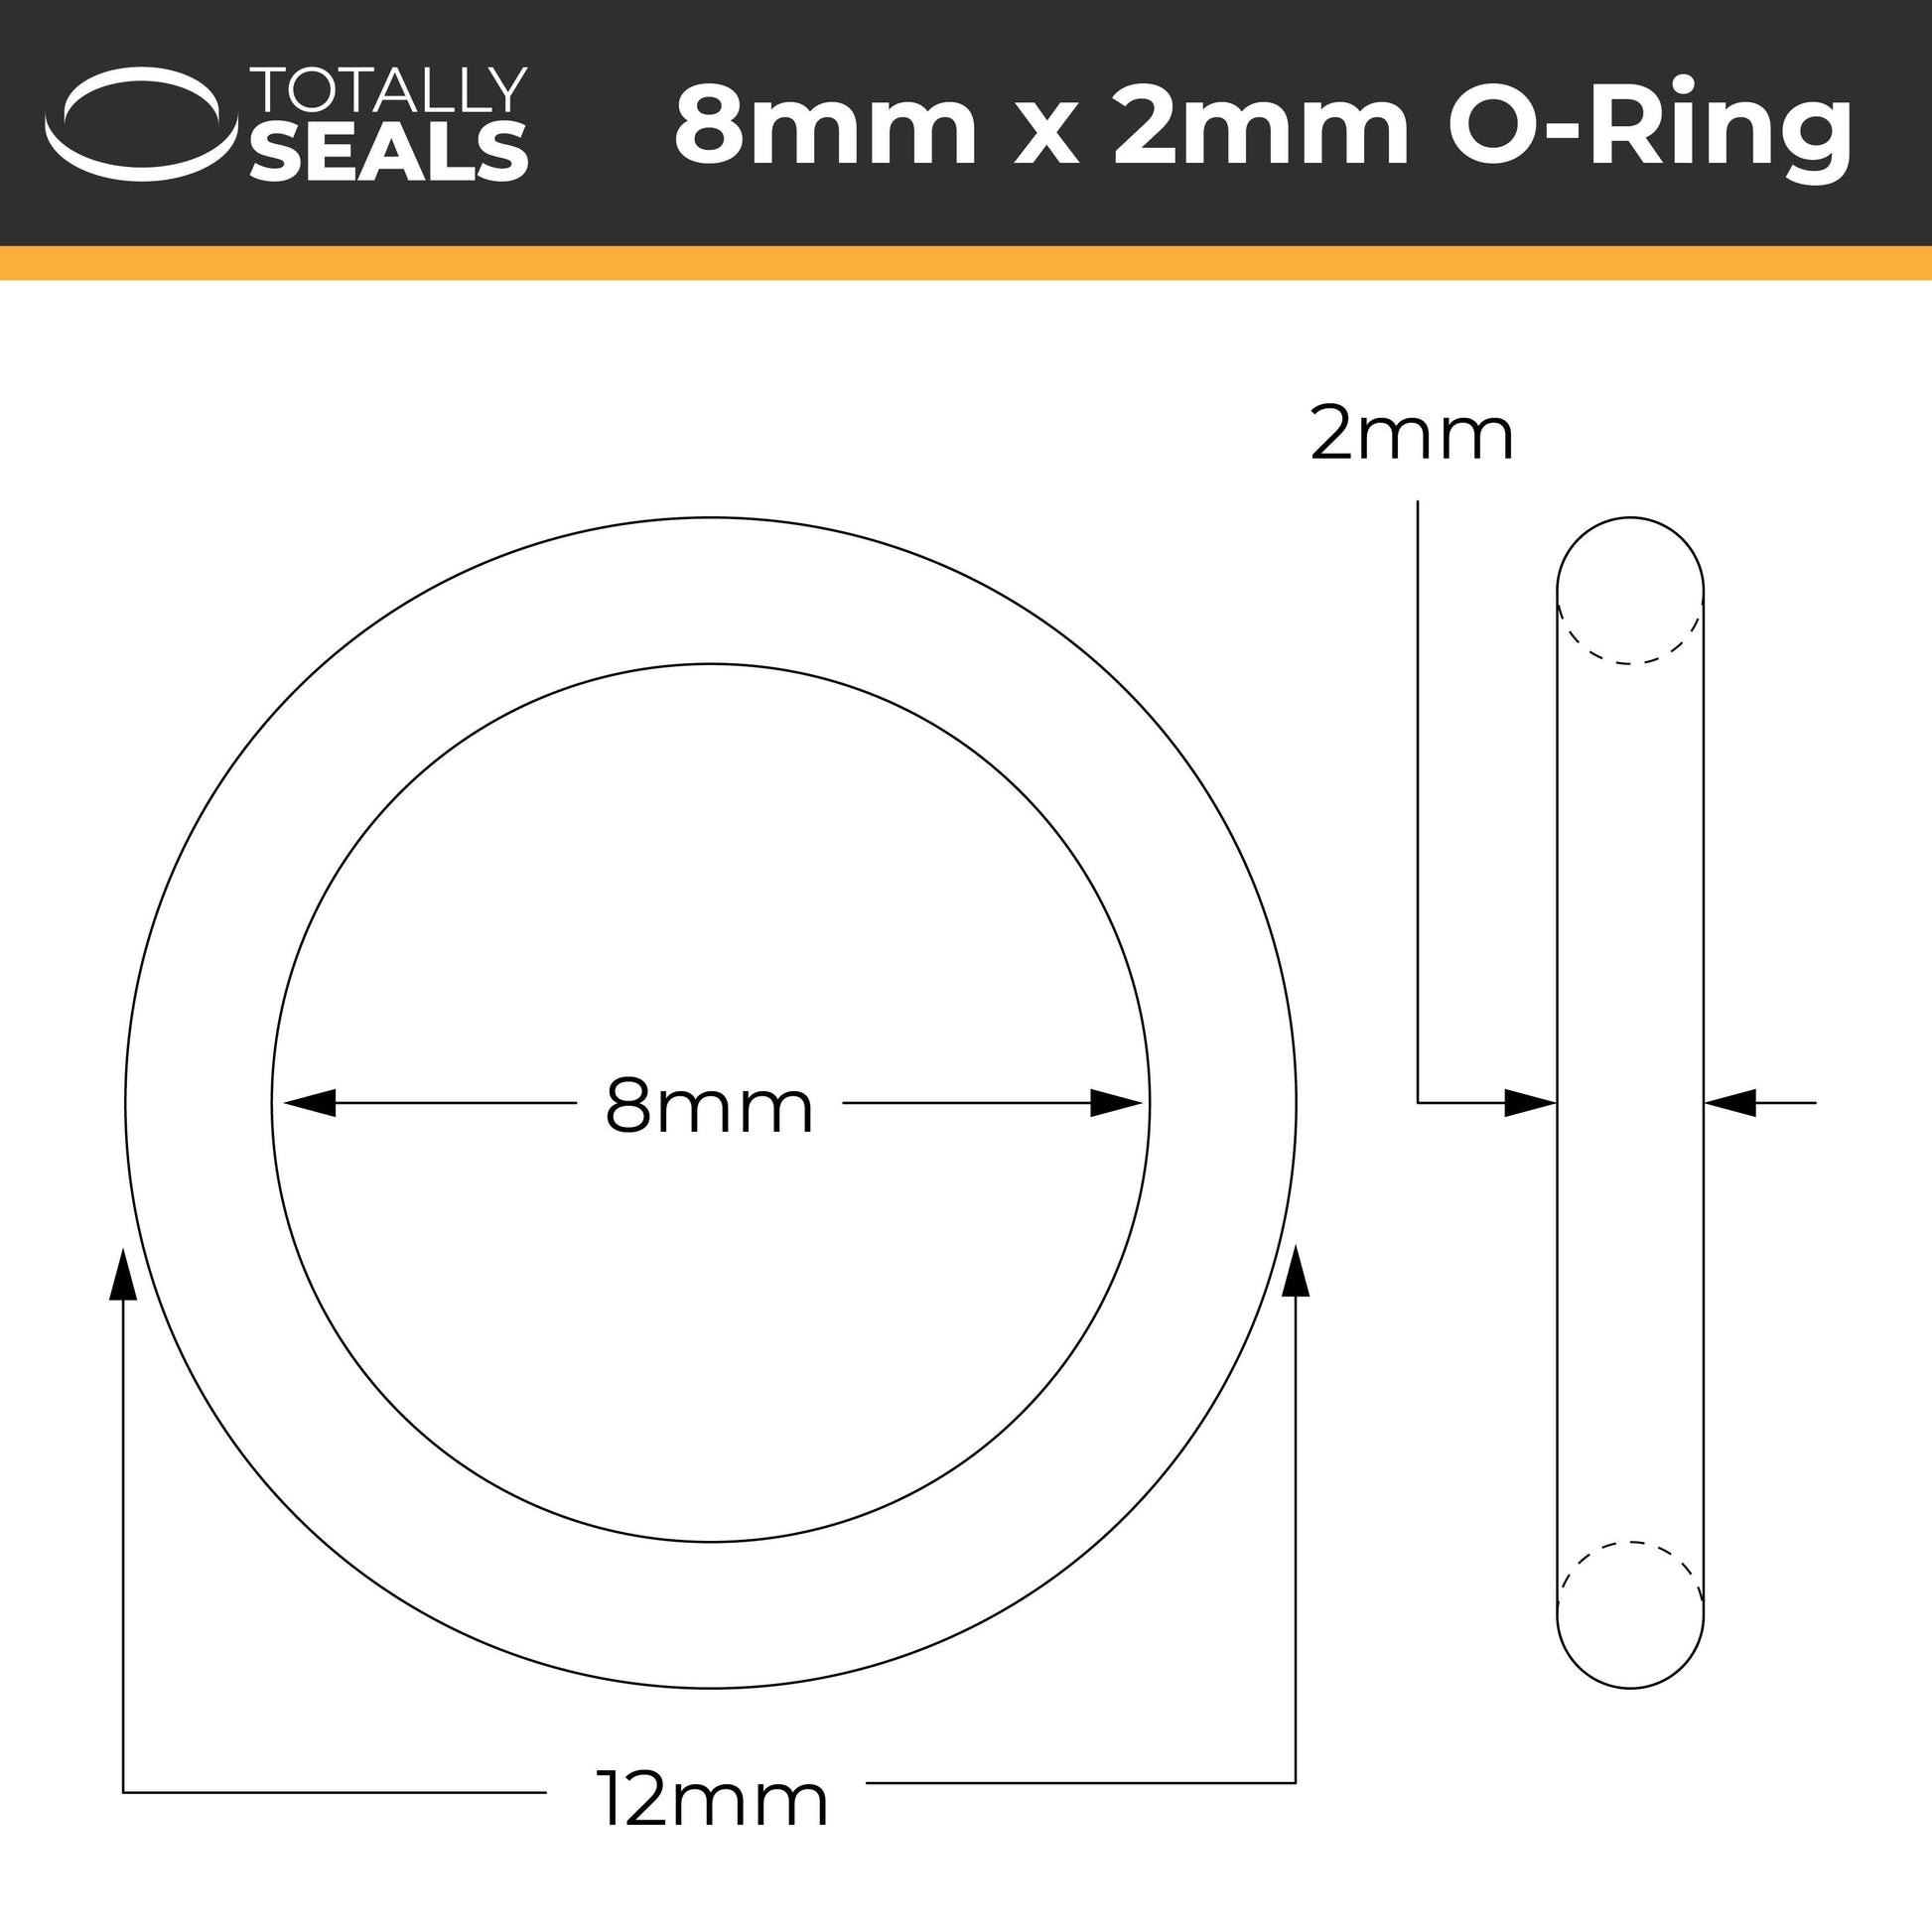 8mm x 2mm (12mm OD) Nitrile O-Rings - Totally Seals®